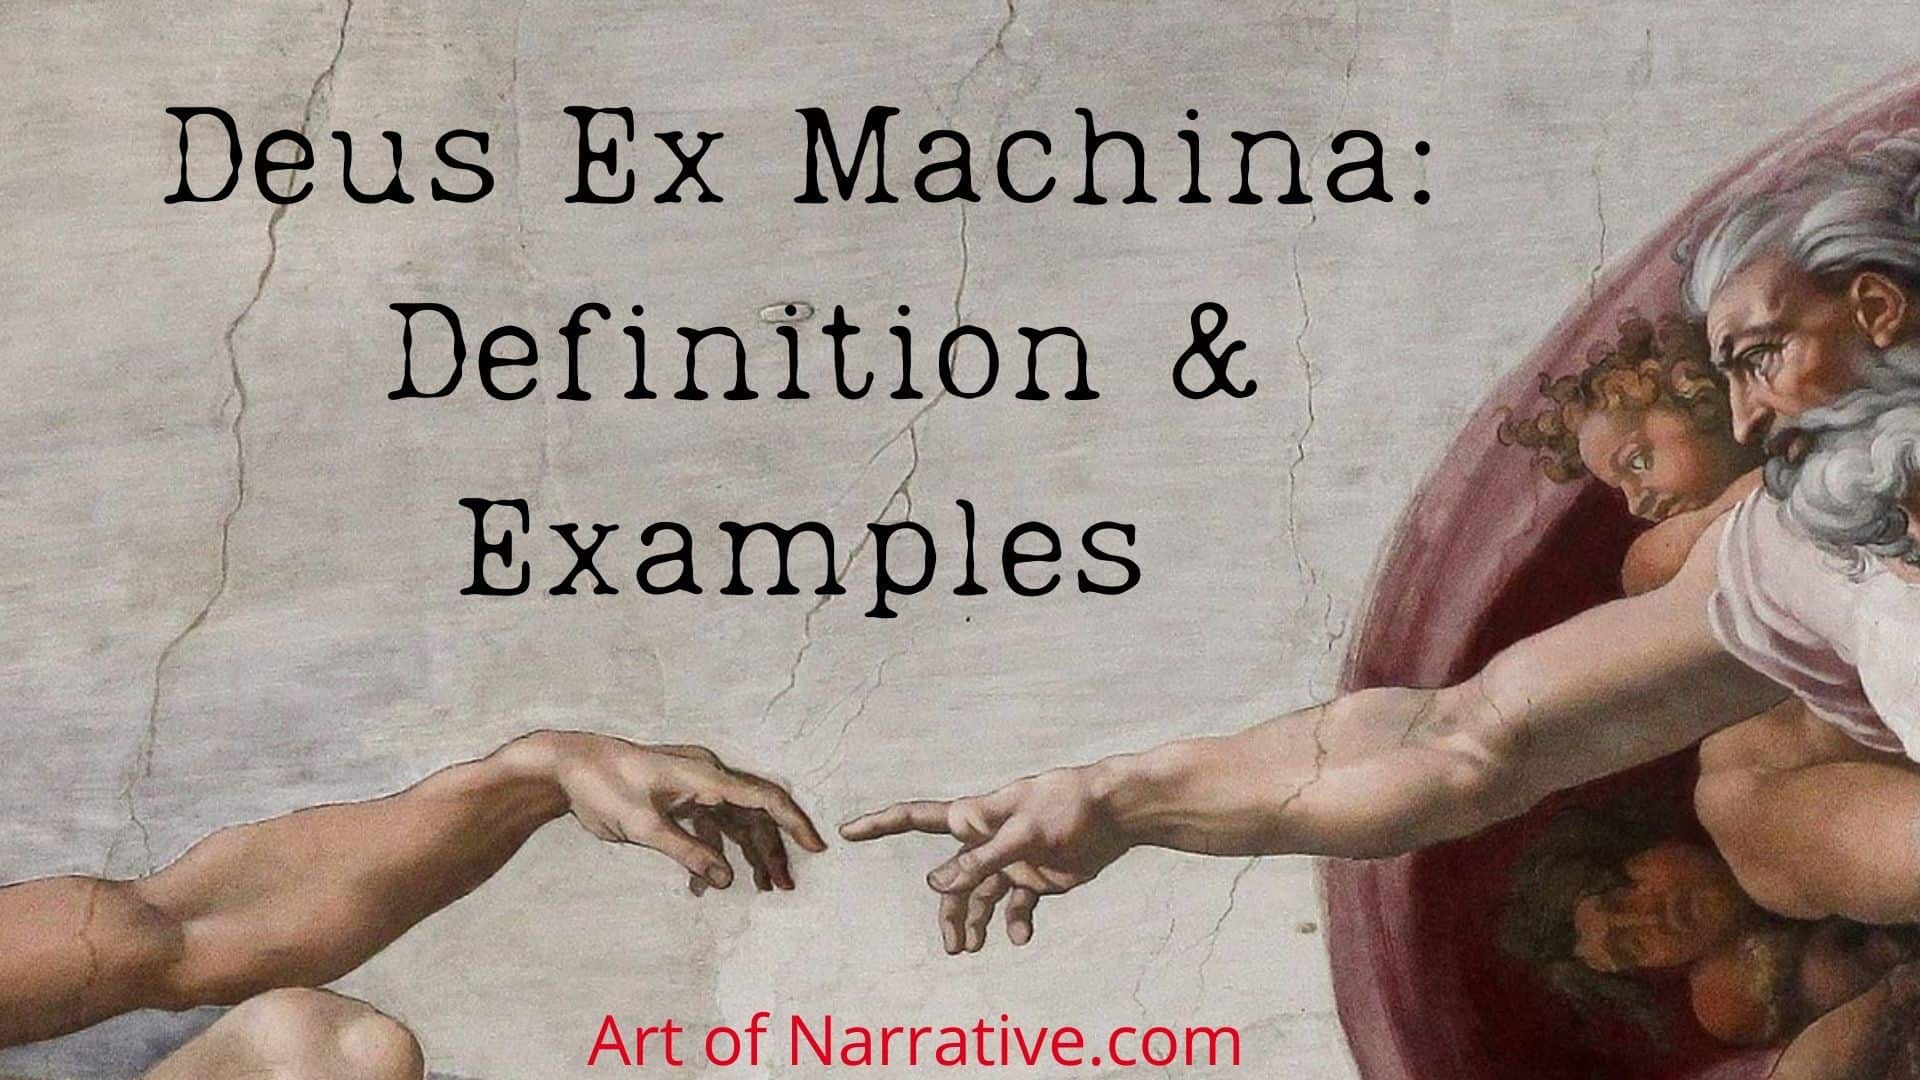 What is Deus Ex Machina — The God From the Machine Plot Device Explained  